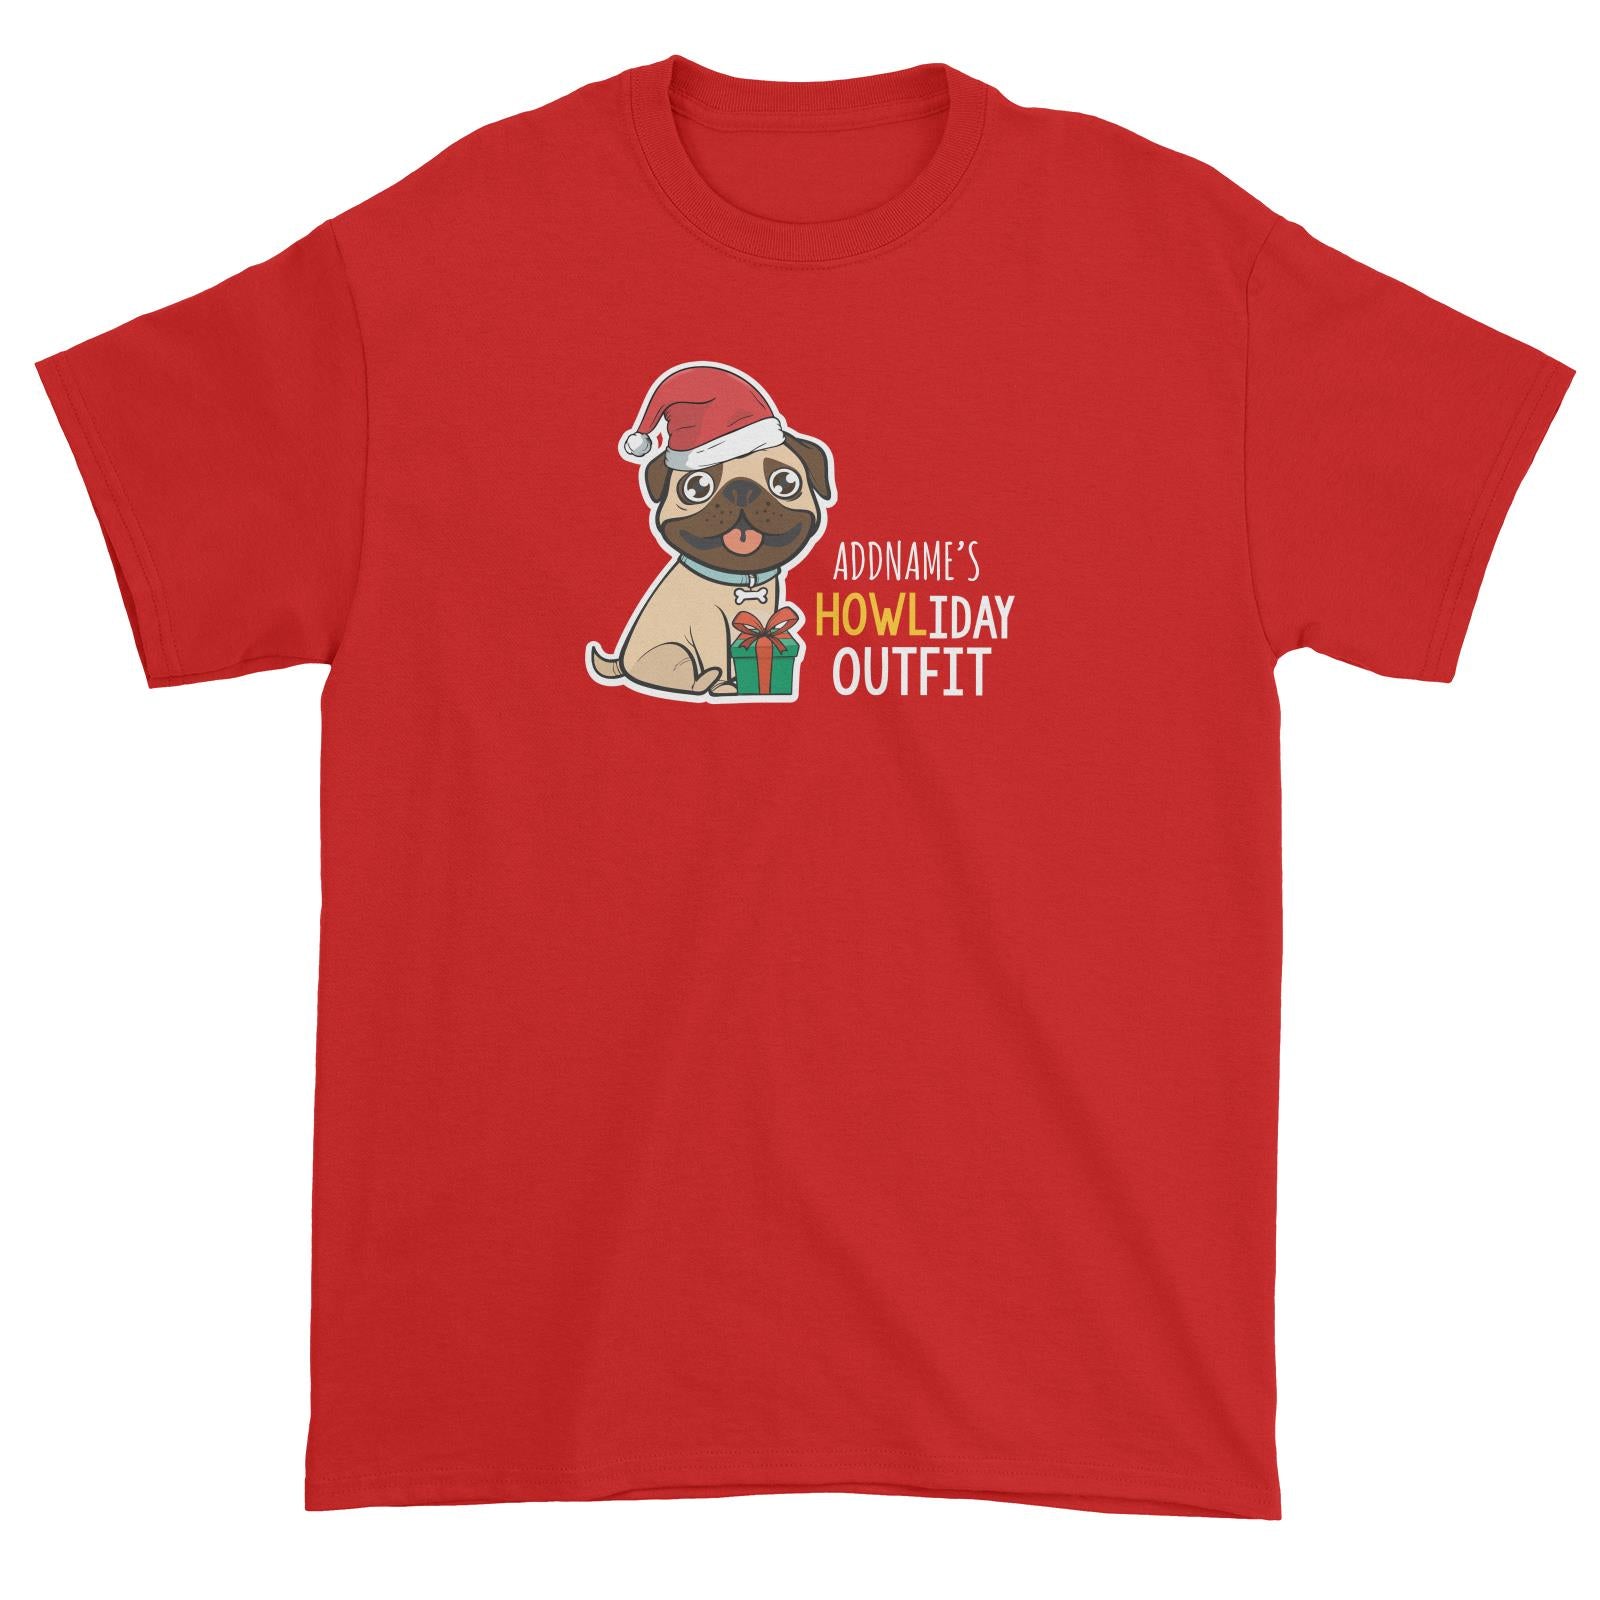 Cute Pug Addname's Howliday Outfit Unisex T-Shirt Christmas Animal Funny Personalizable Designs